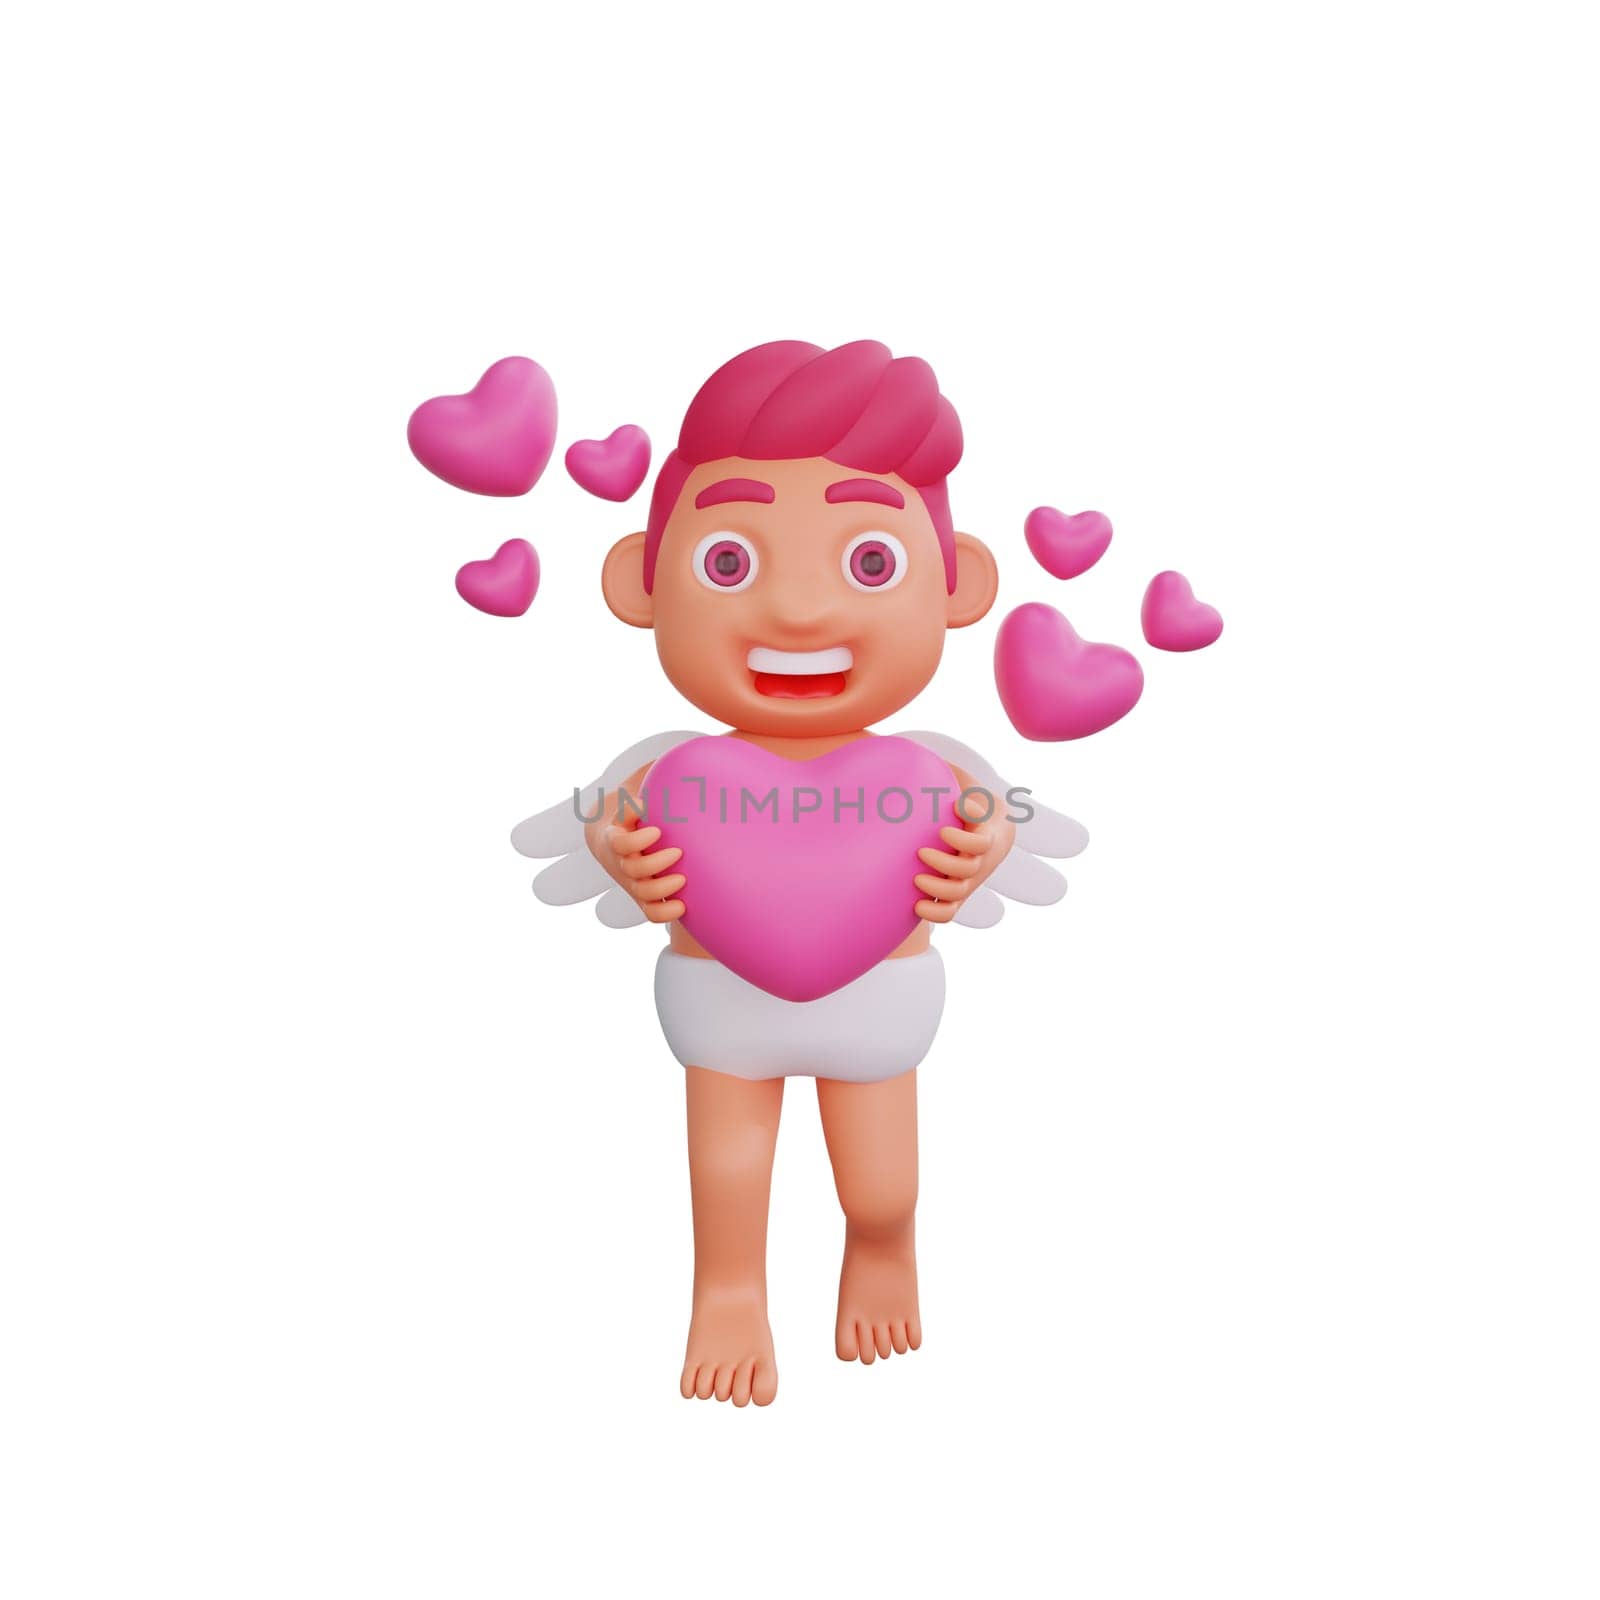 3D illustration of Valentine Cupid character holding a heart, surrounded by floating hearts, expressing love and affection, perfect for Valentine or love themed projects